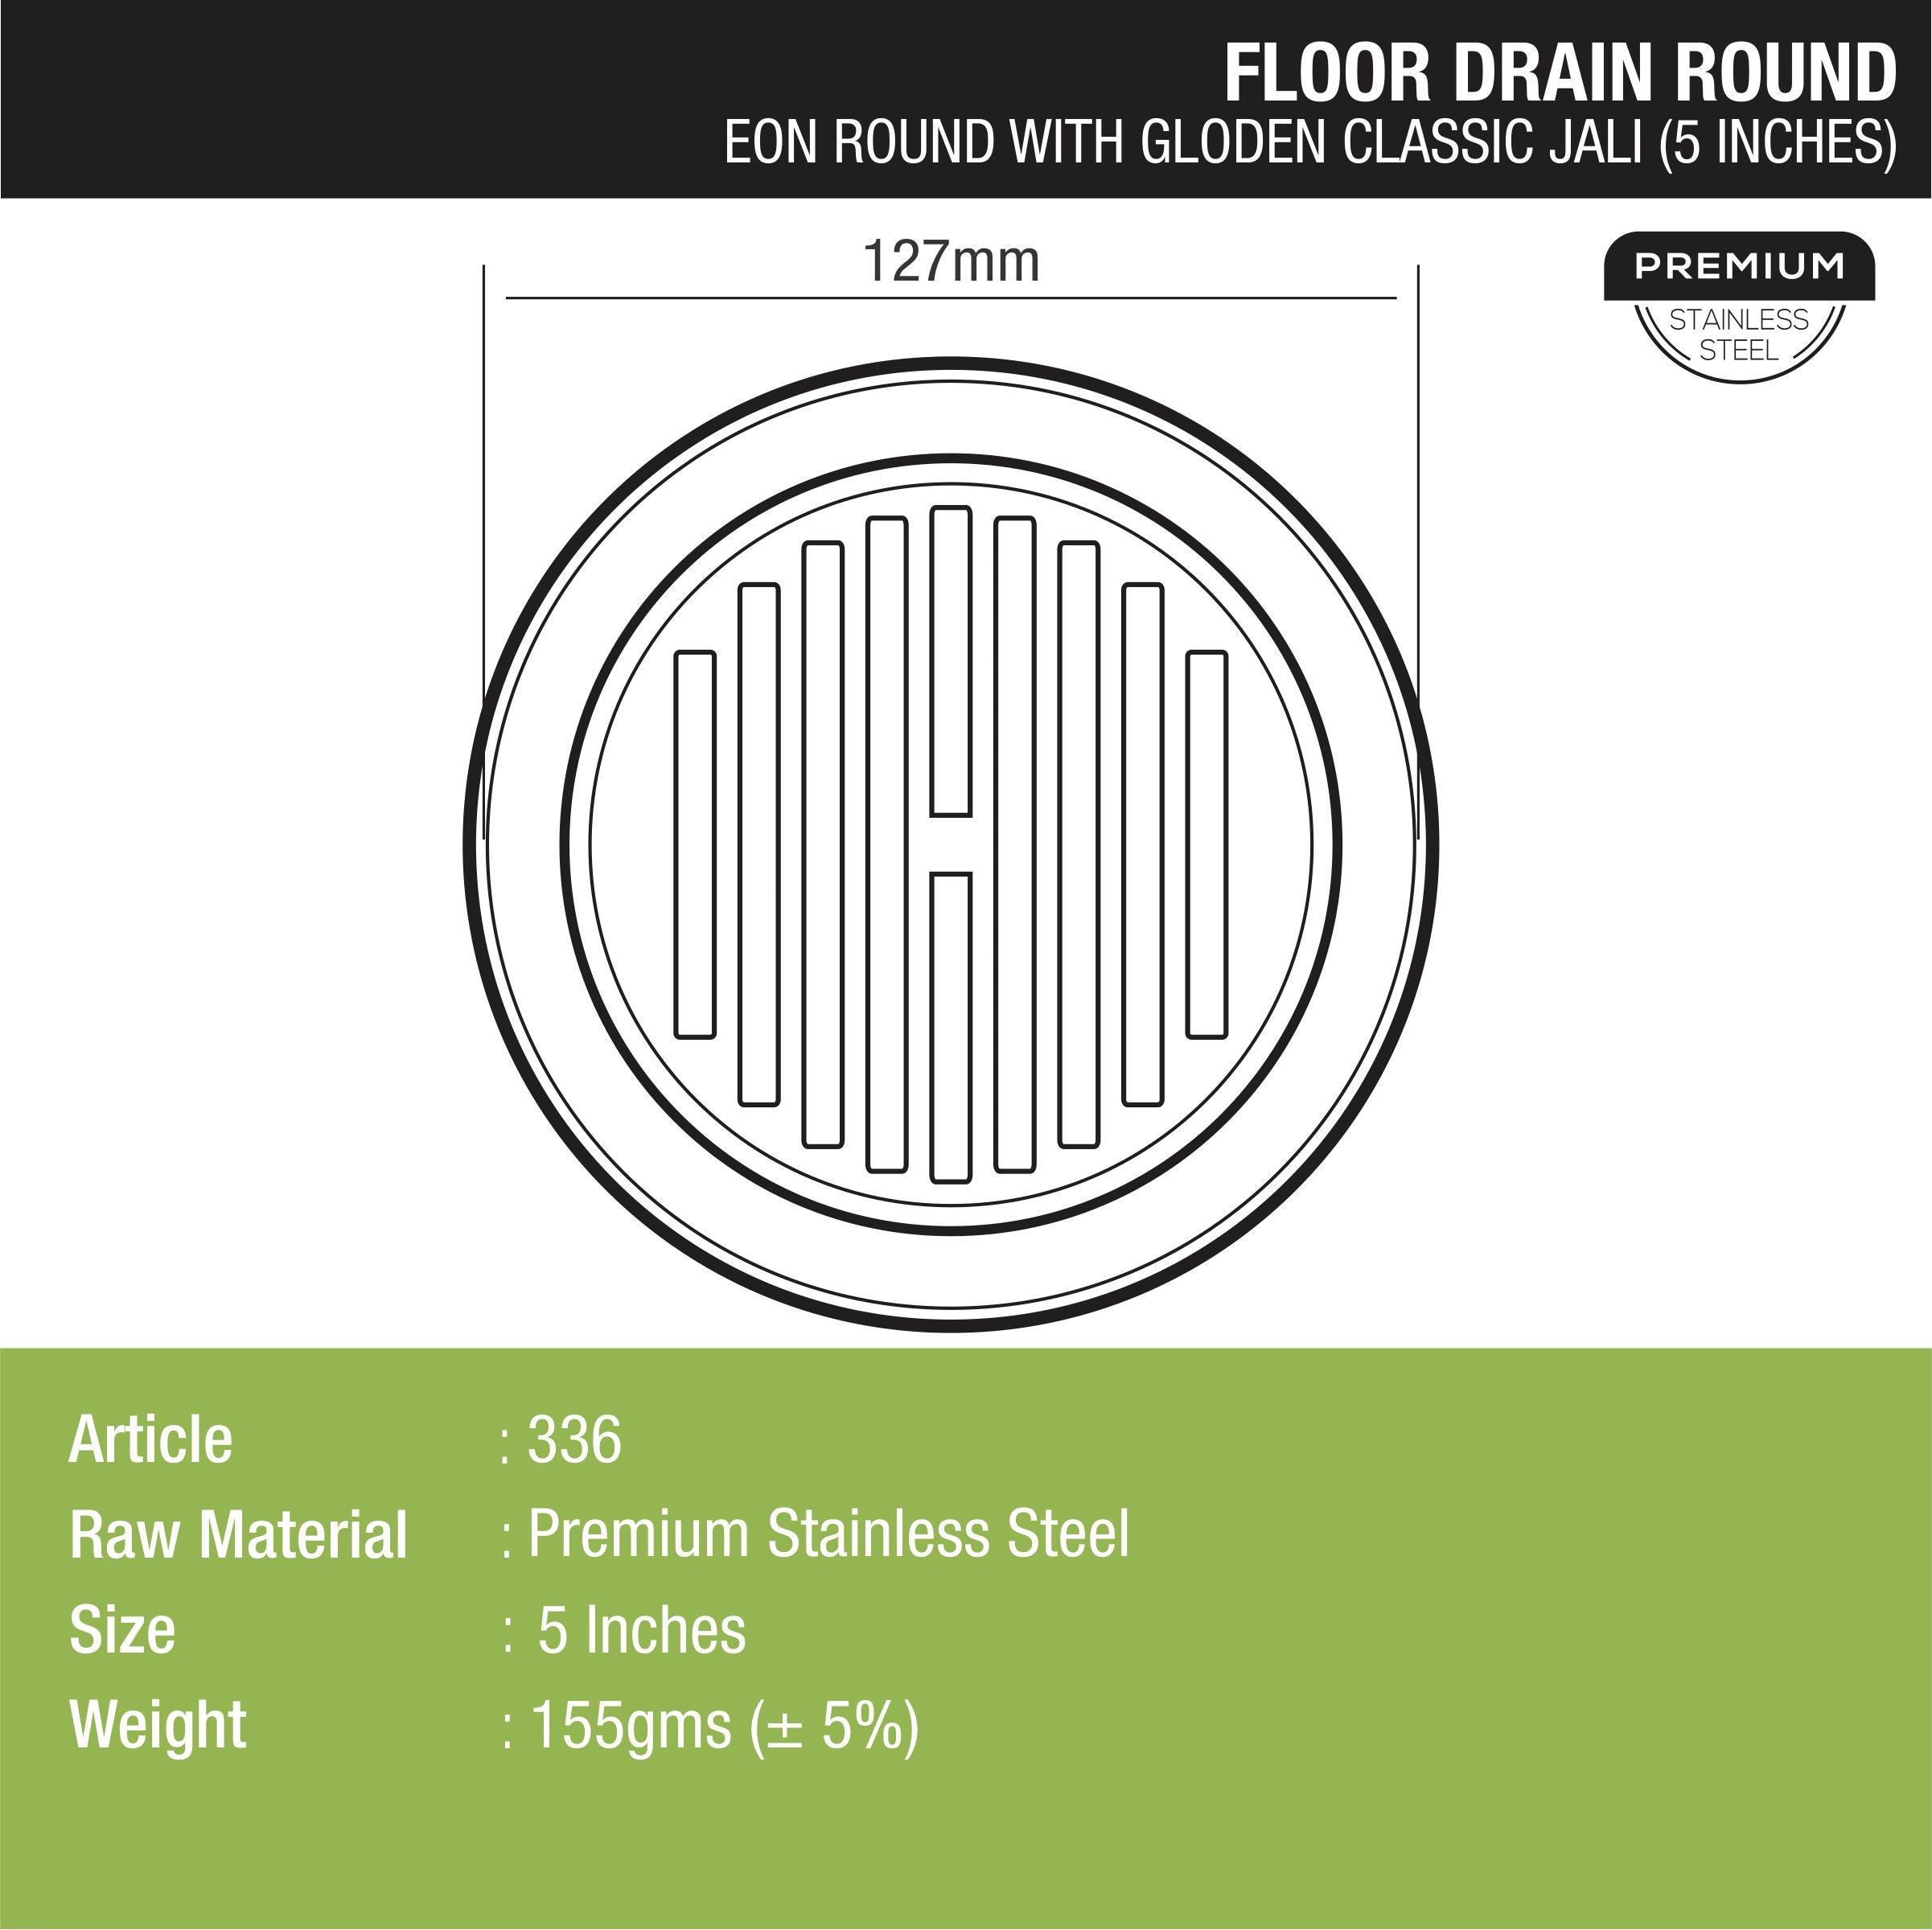 Eon Round Floor Drain with Golden Classic Jali (5 inches) dimensions and sizes